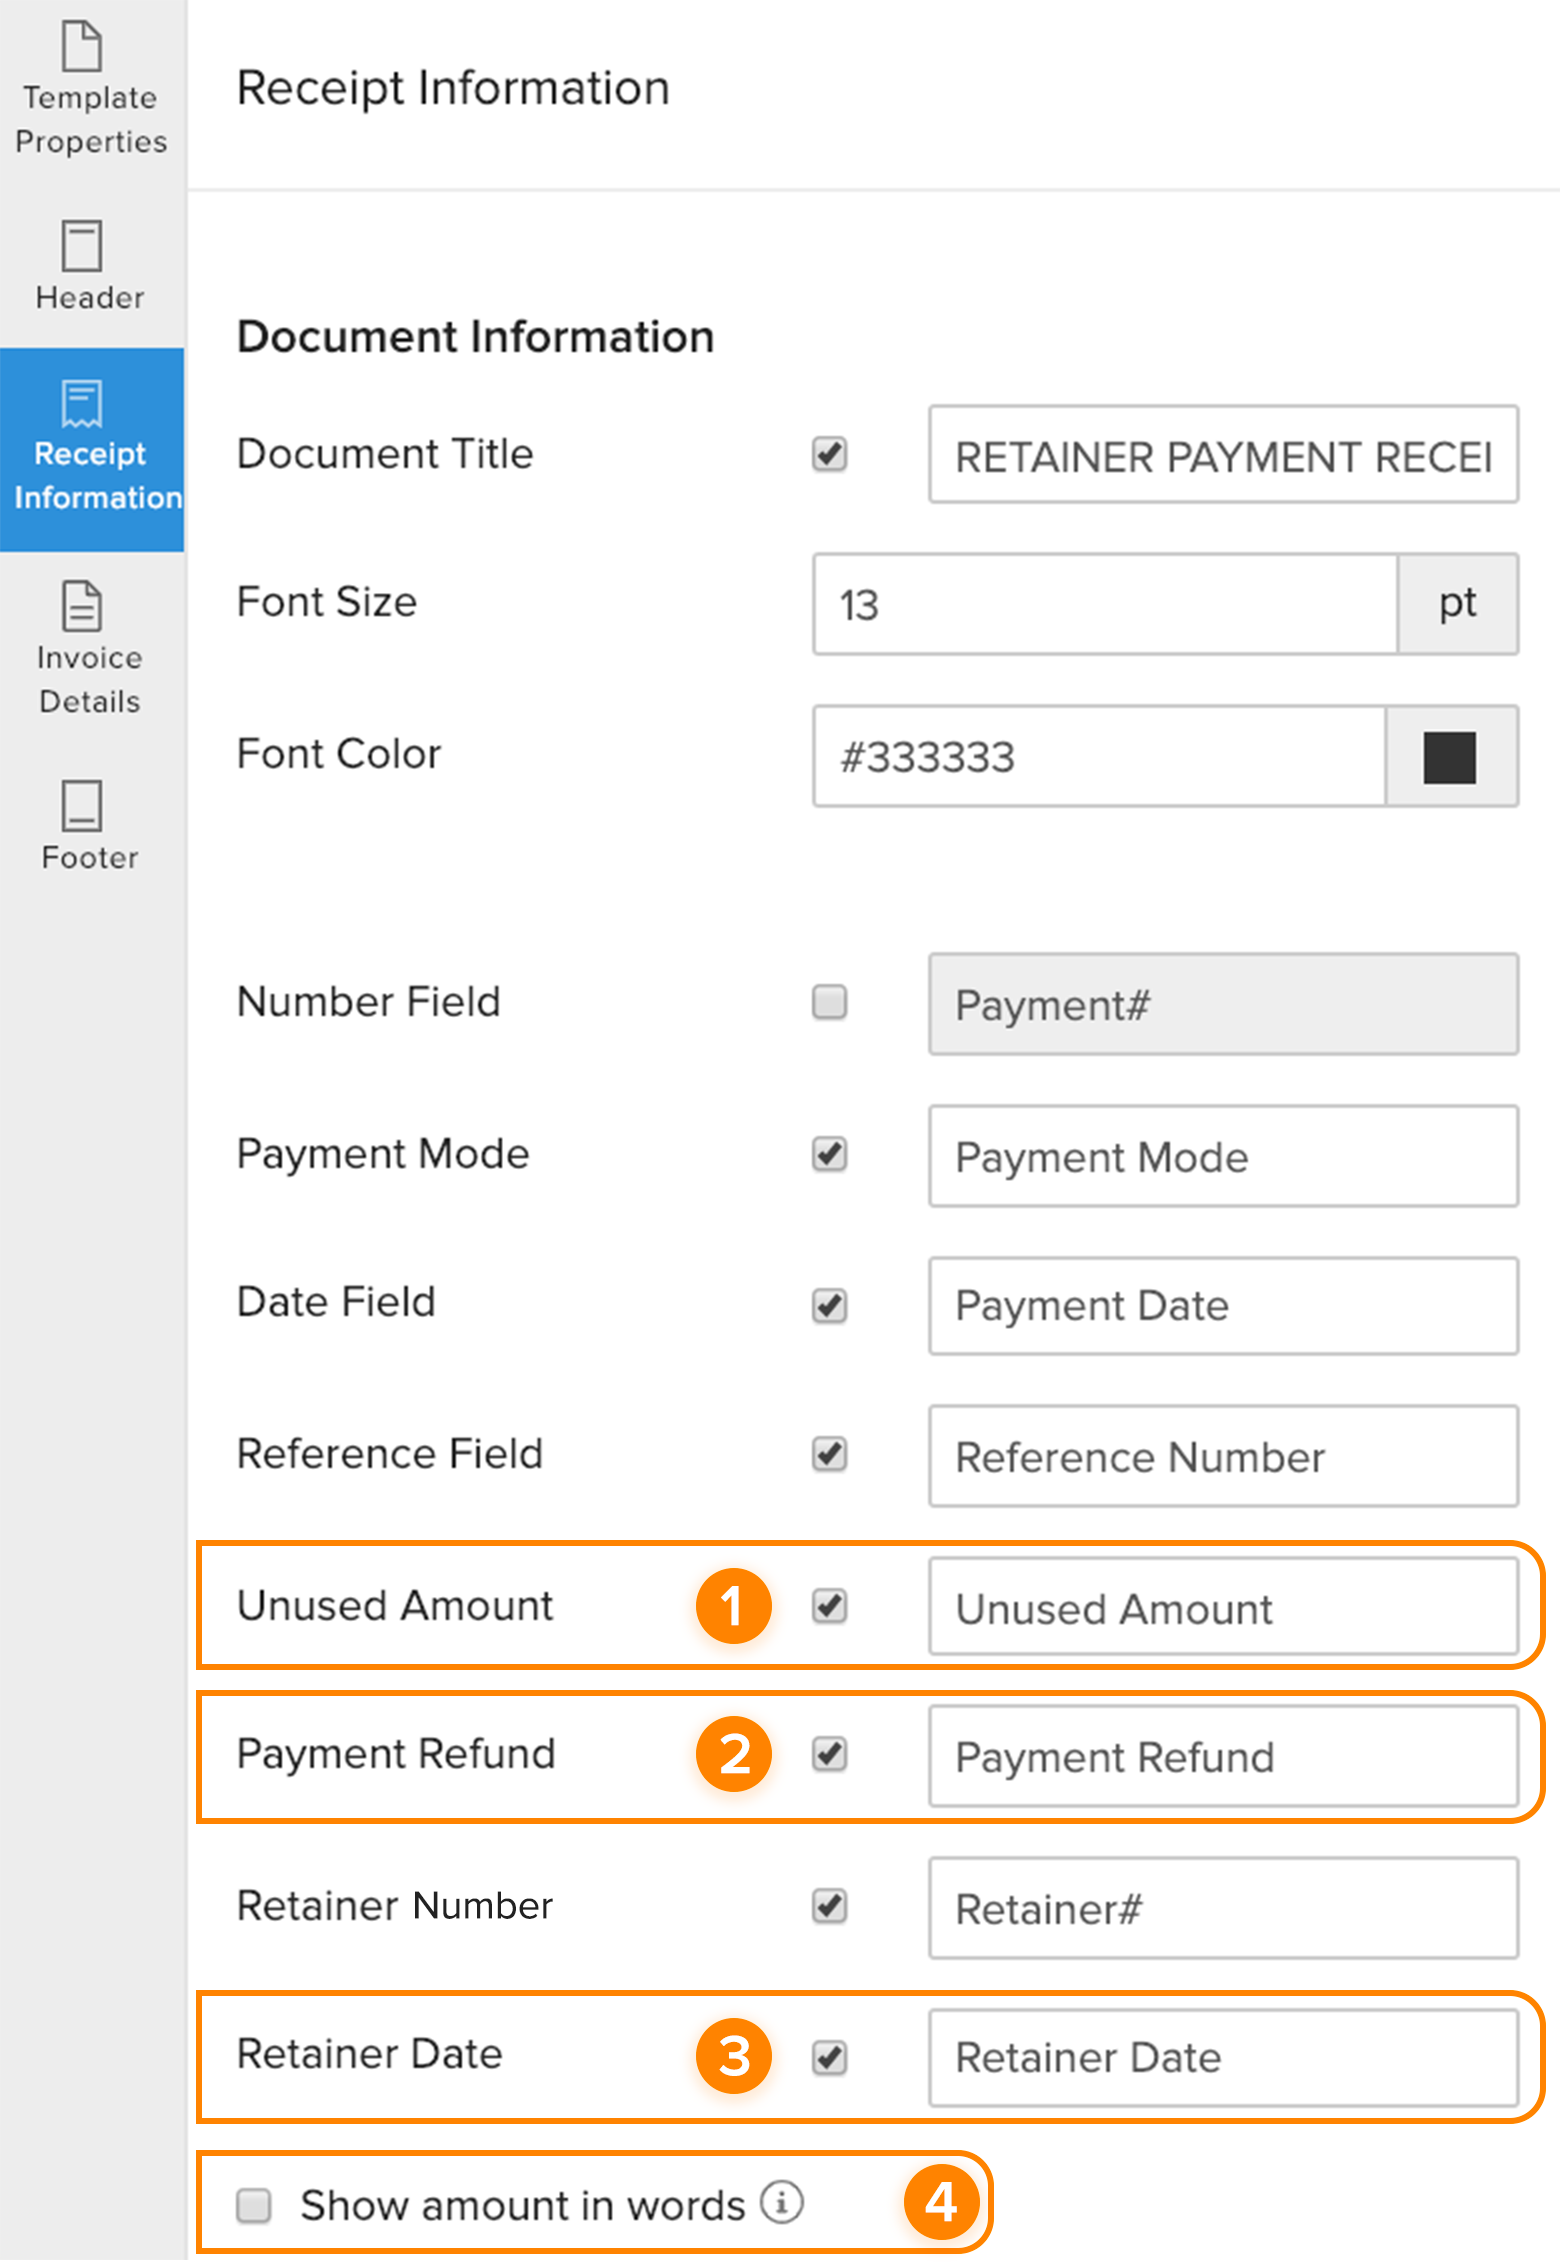 Template Retainer Payment Receipts